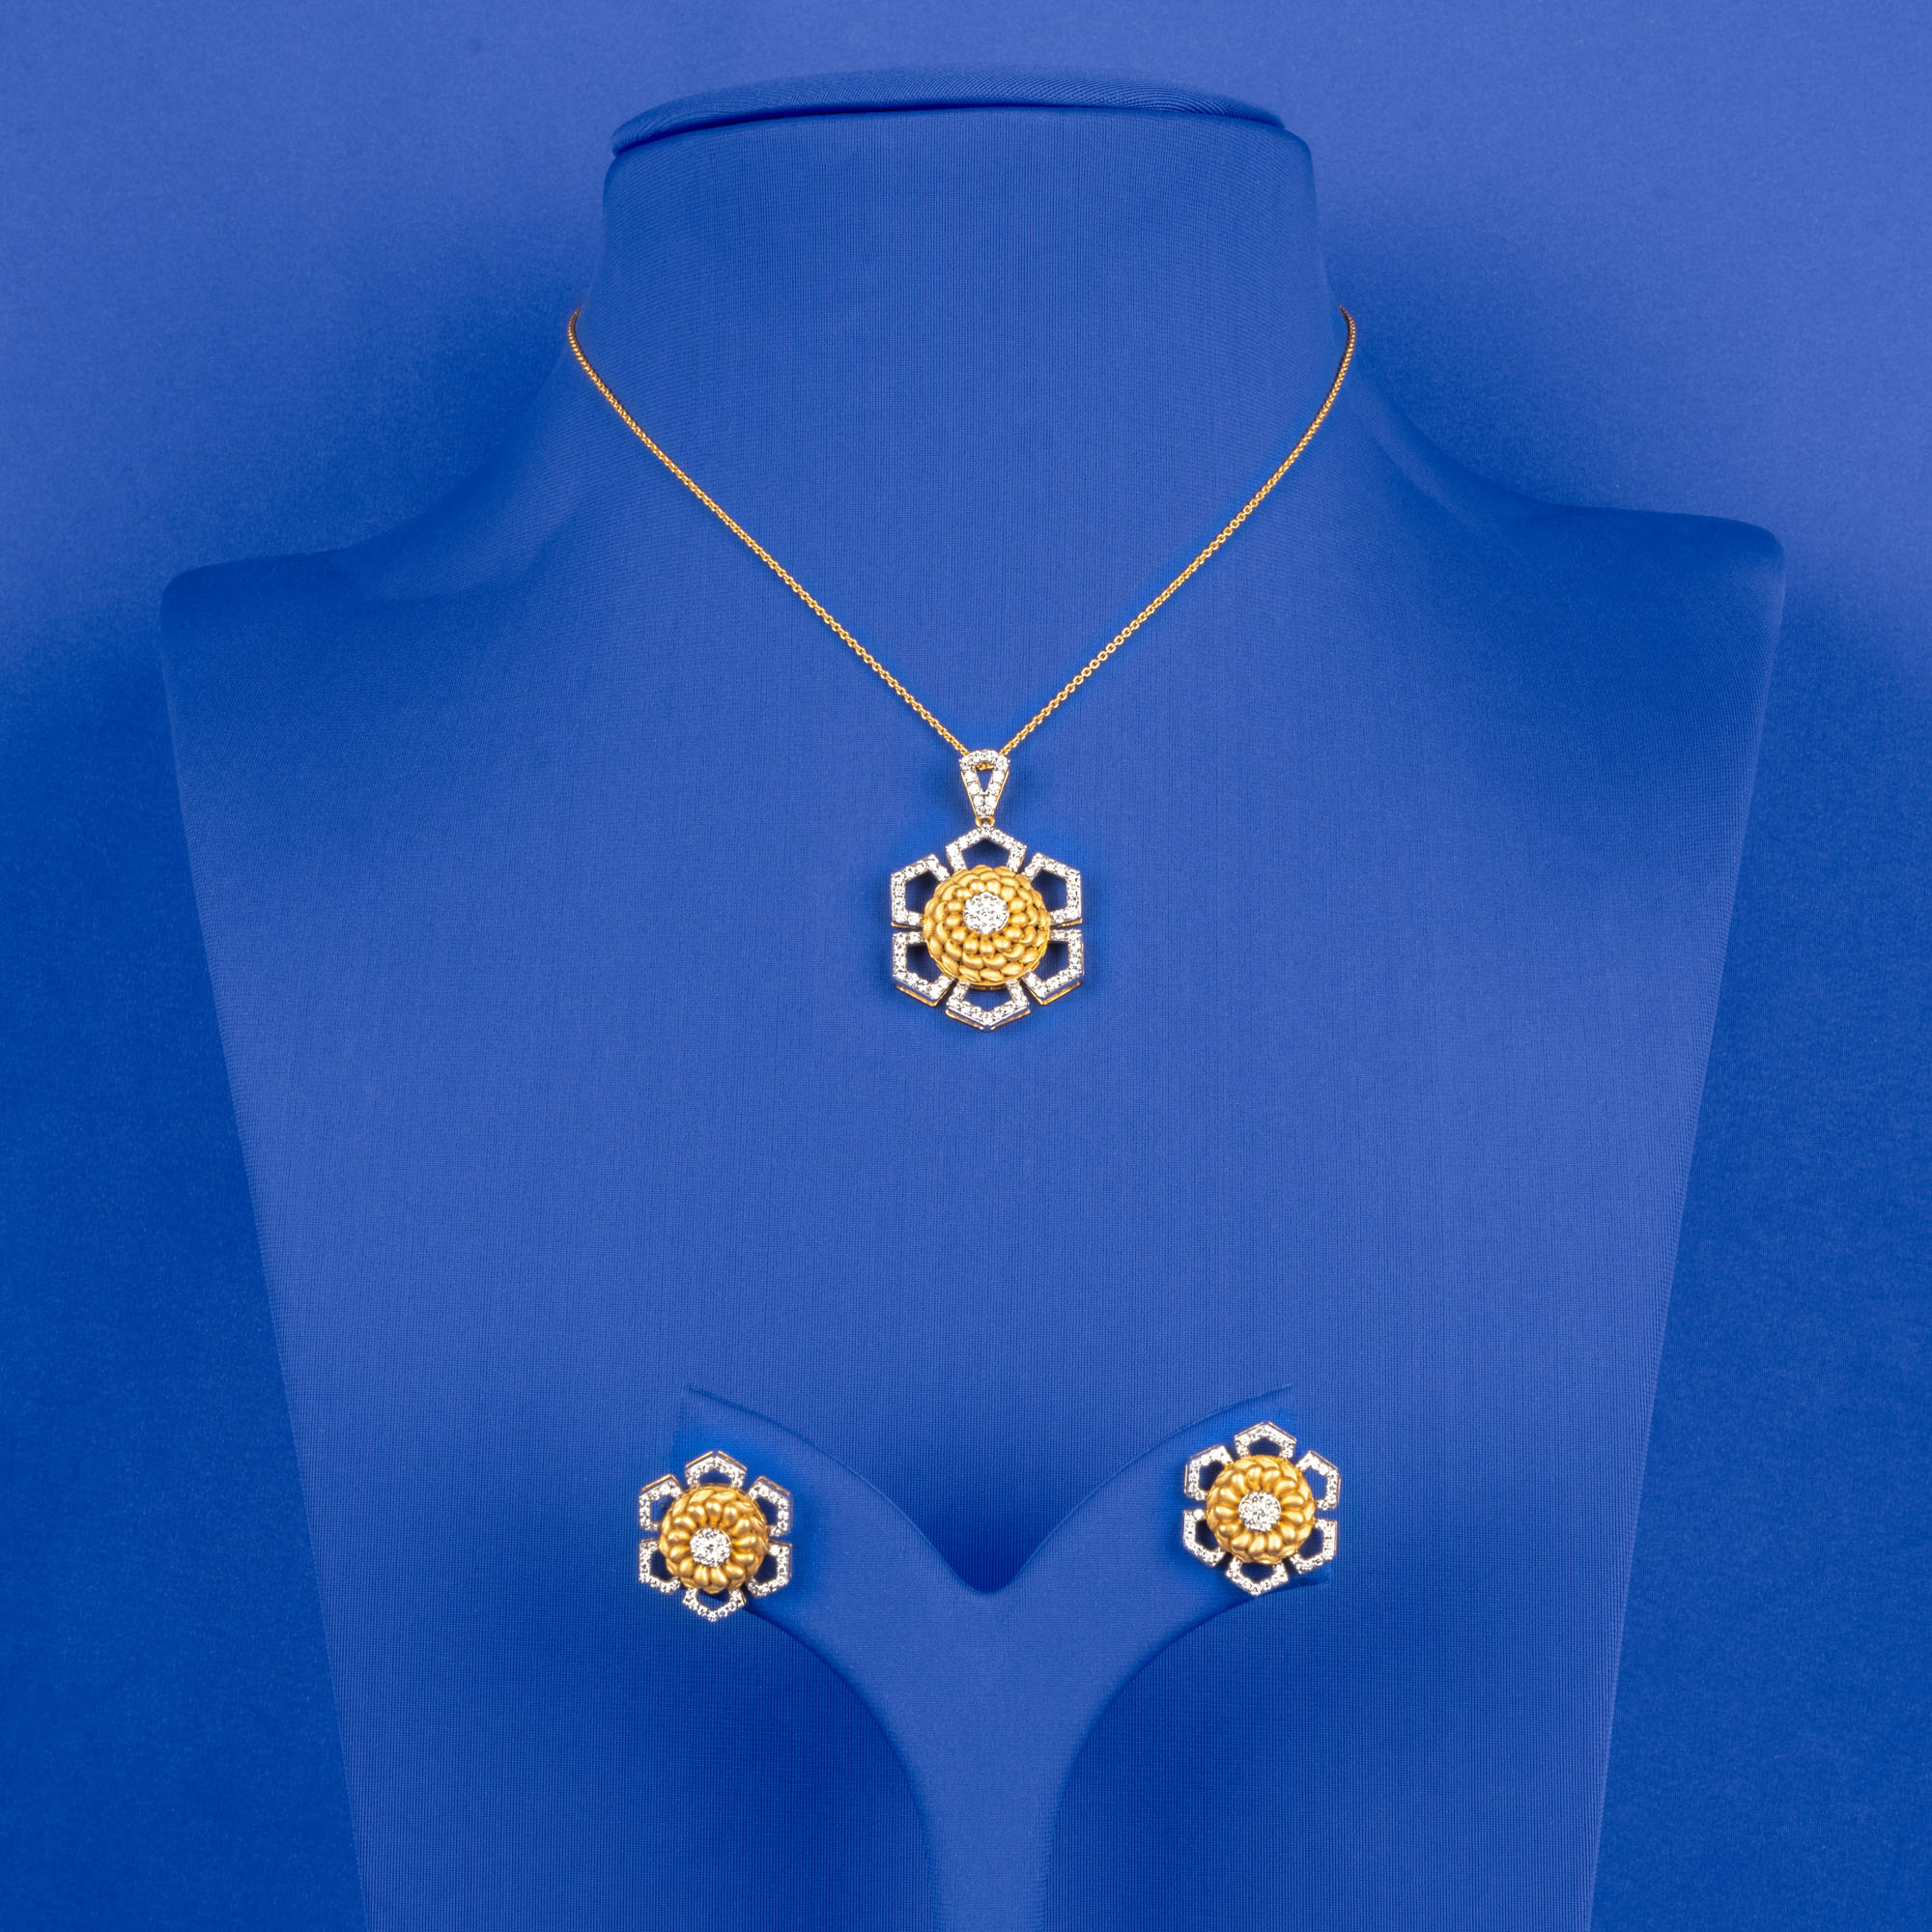 Dazzling Serenade: Handmade 18k Yellow Gold Diamond Pendant and Earrings Set (Chain not included)